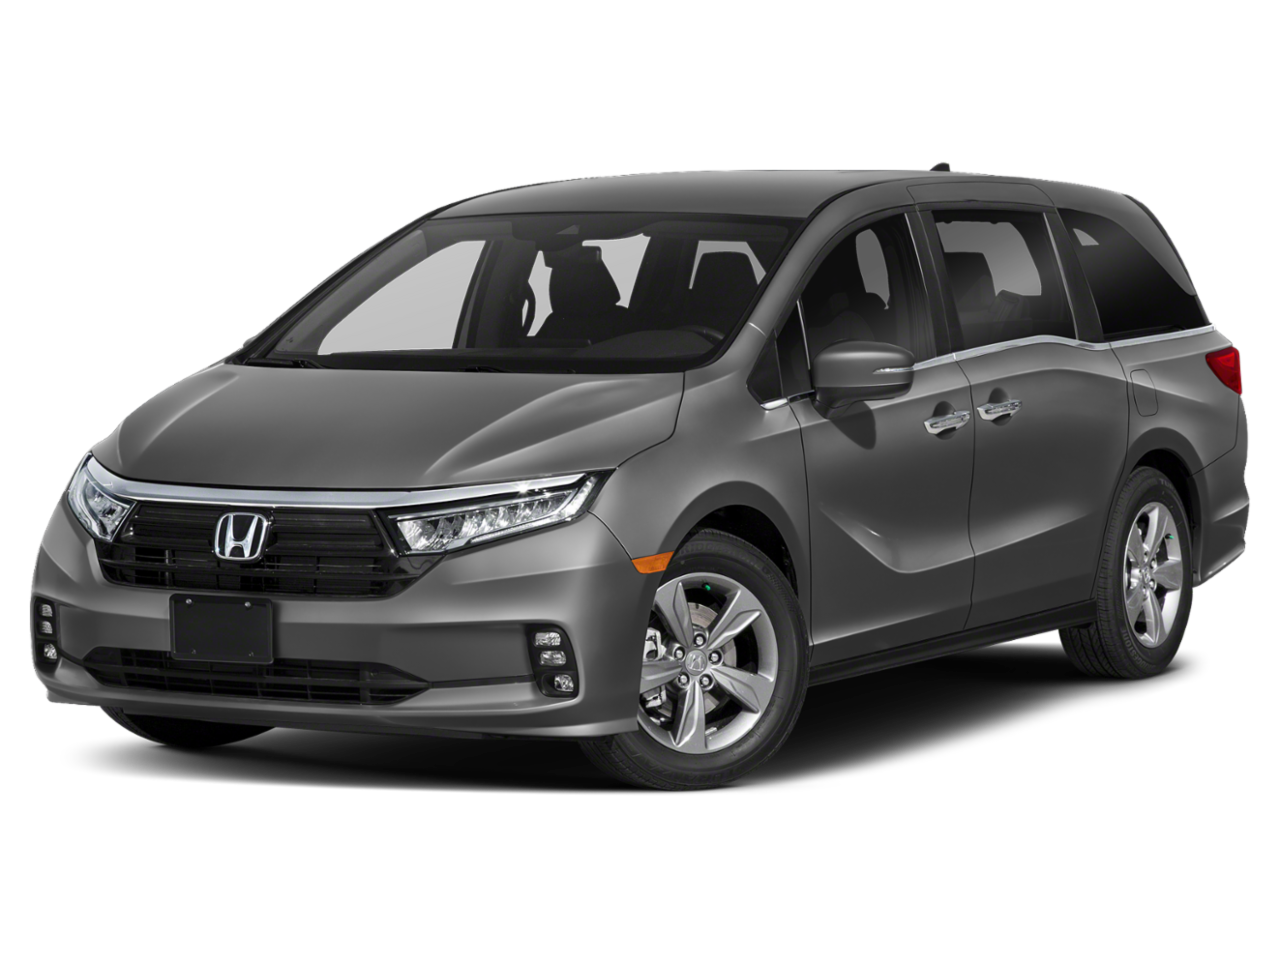 Criswell Honda is a Germantown Honda dealer and a new car and used car